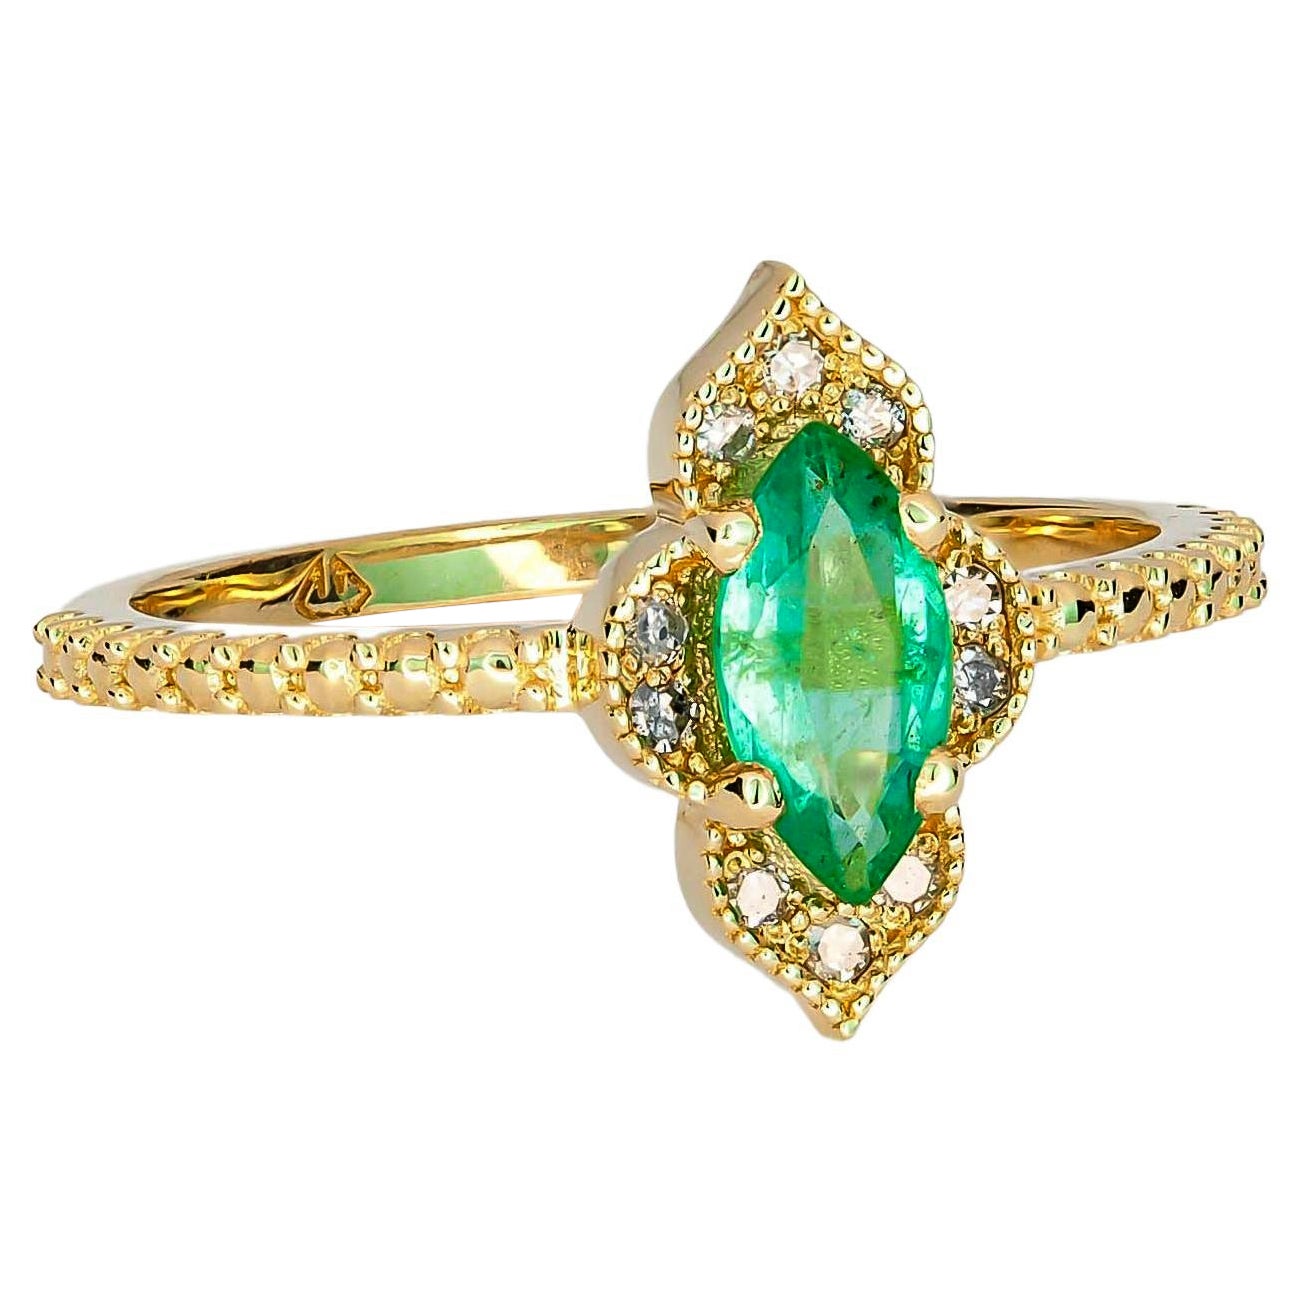 Emerald 14k Gold Ring, Emerald Vintage Ring, Marquise Emerald Ring For Sale